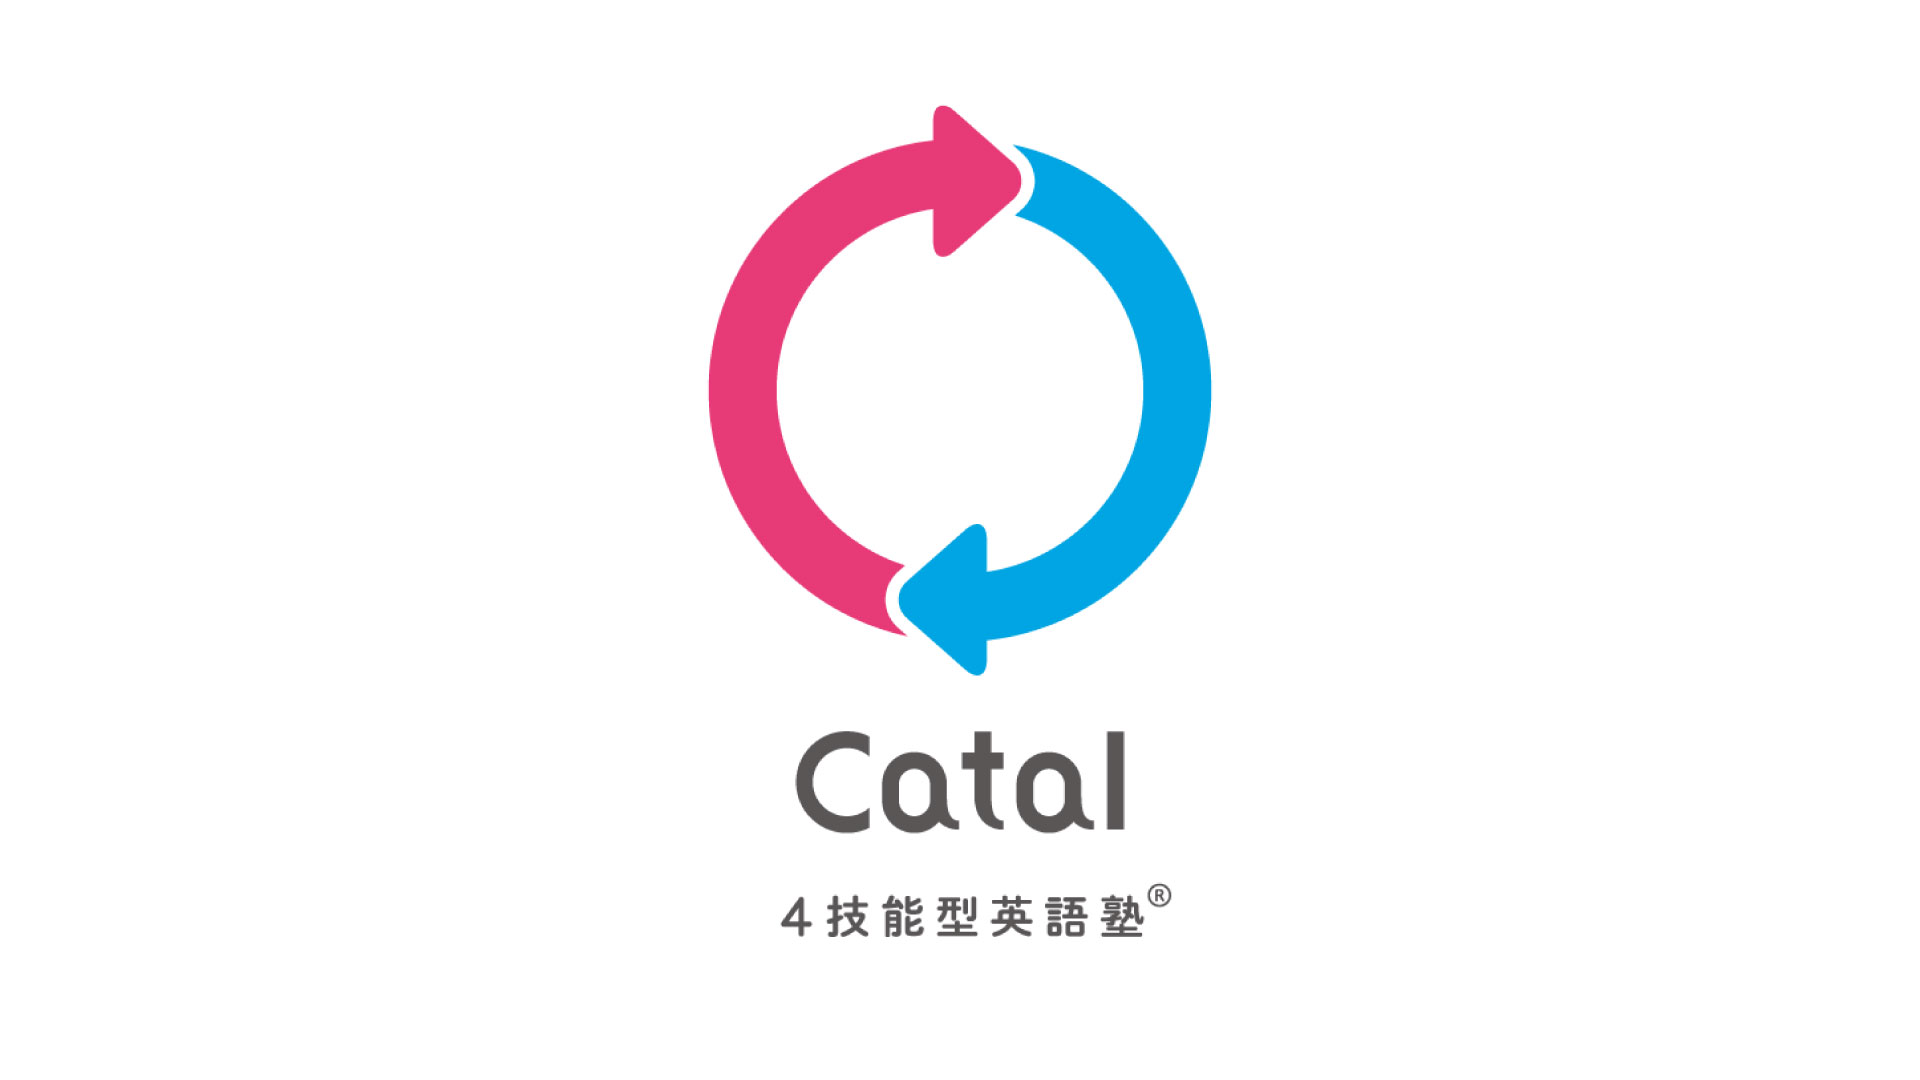 Catal